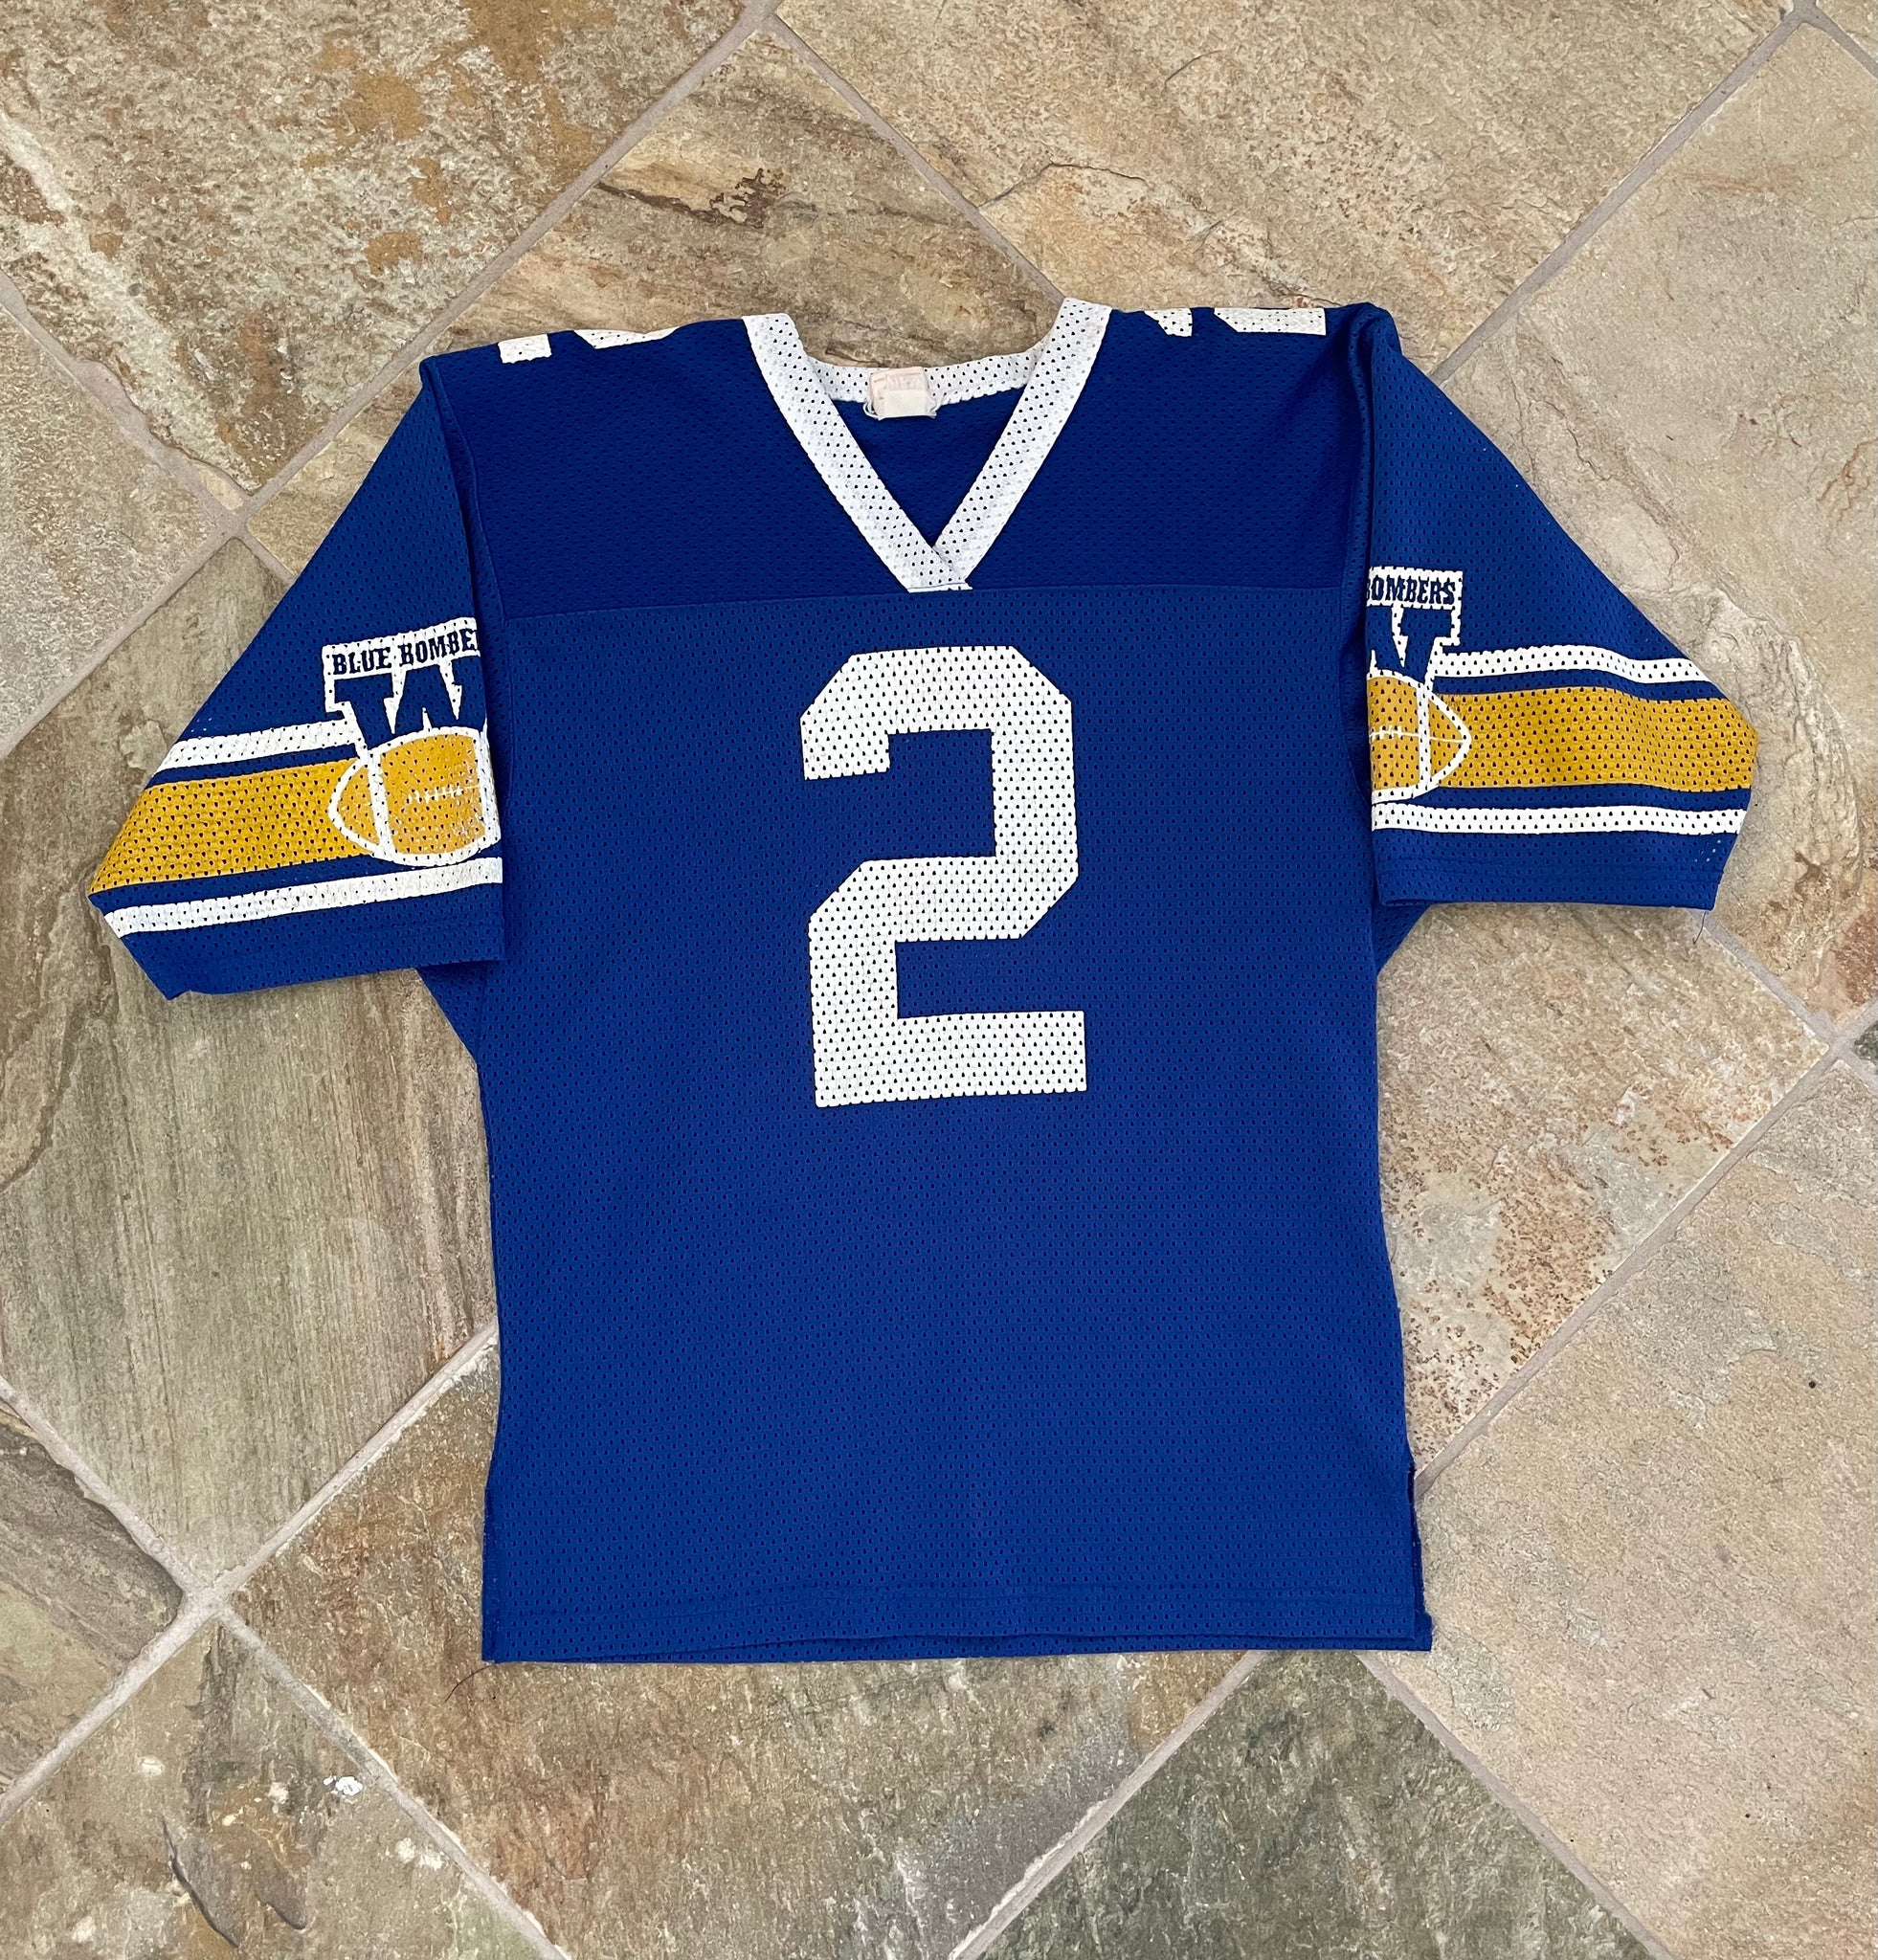 Pin on CFL Jersey